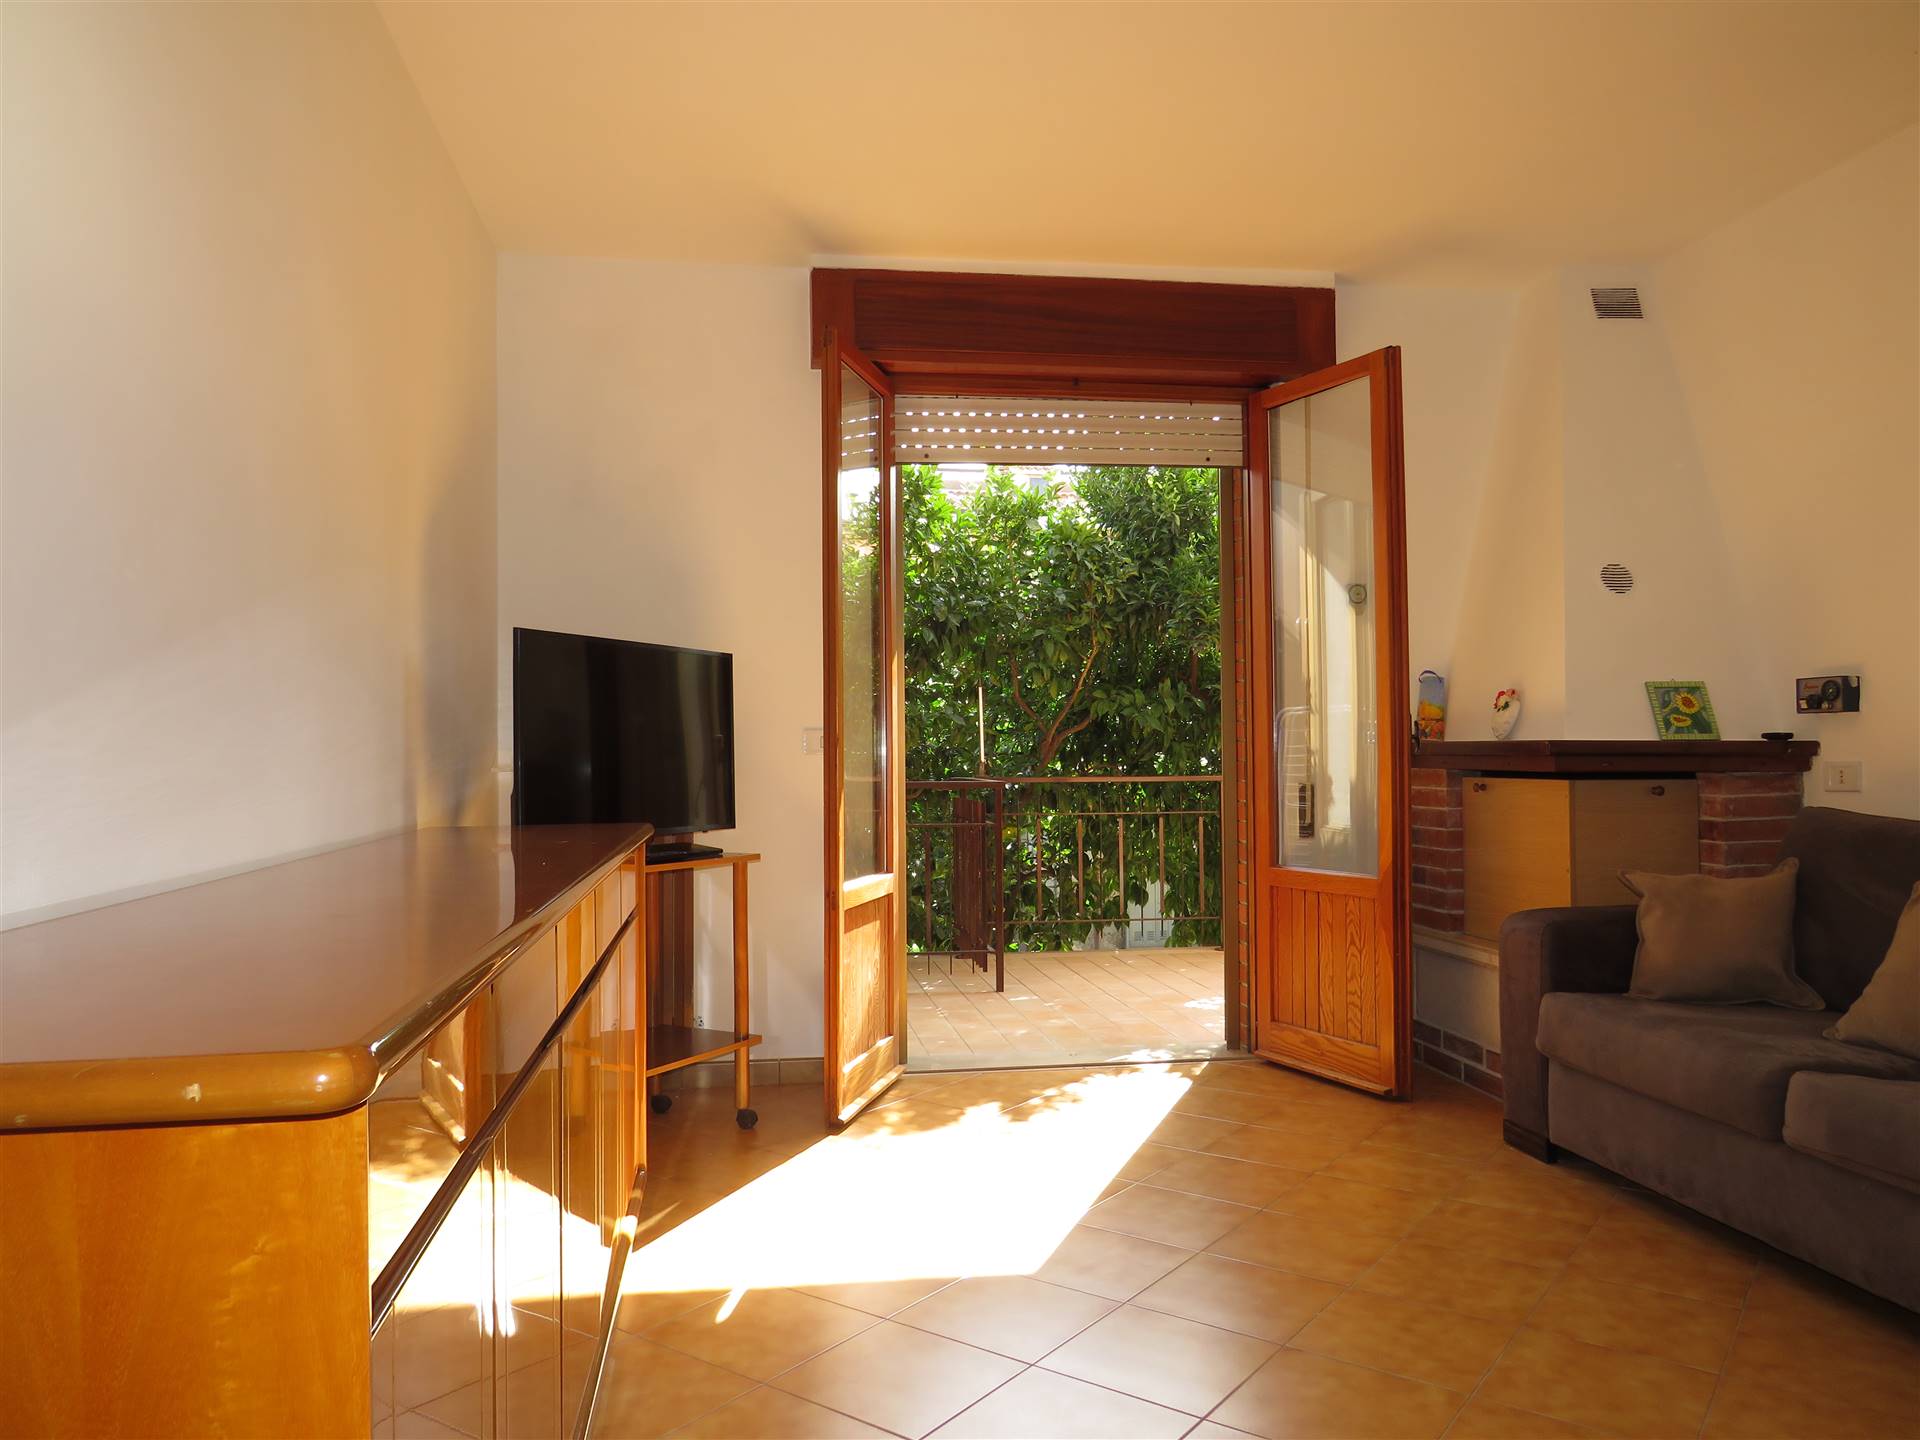 LATINA SCALO, LATINA, Apartment for rent of 60 Sq. mt., Habitable, Heating Individual heating system, Energetic class: G, Epi: 185,98 kwh/m2 year, 